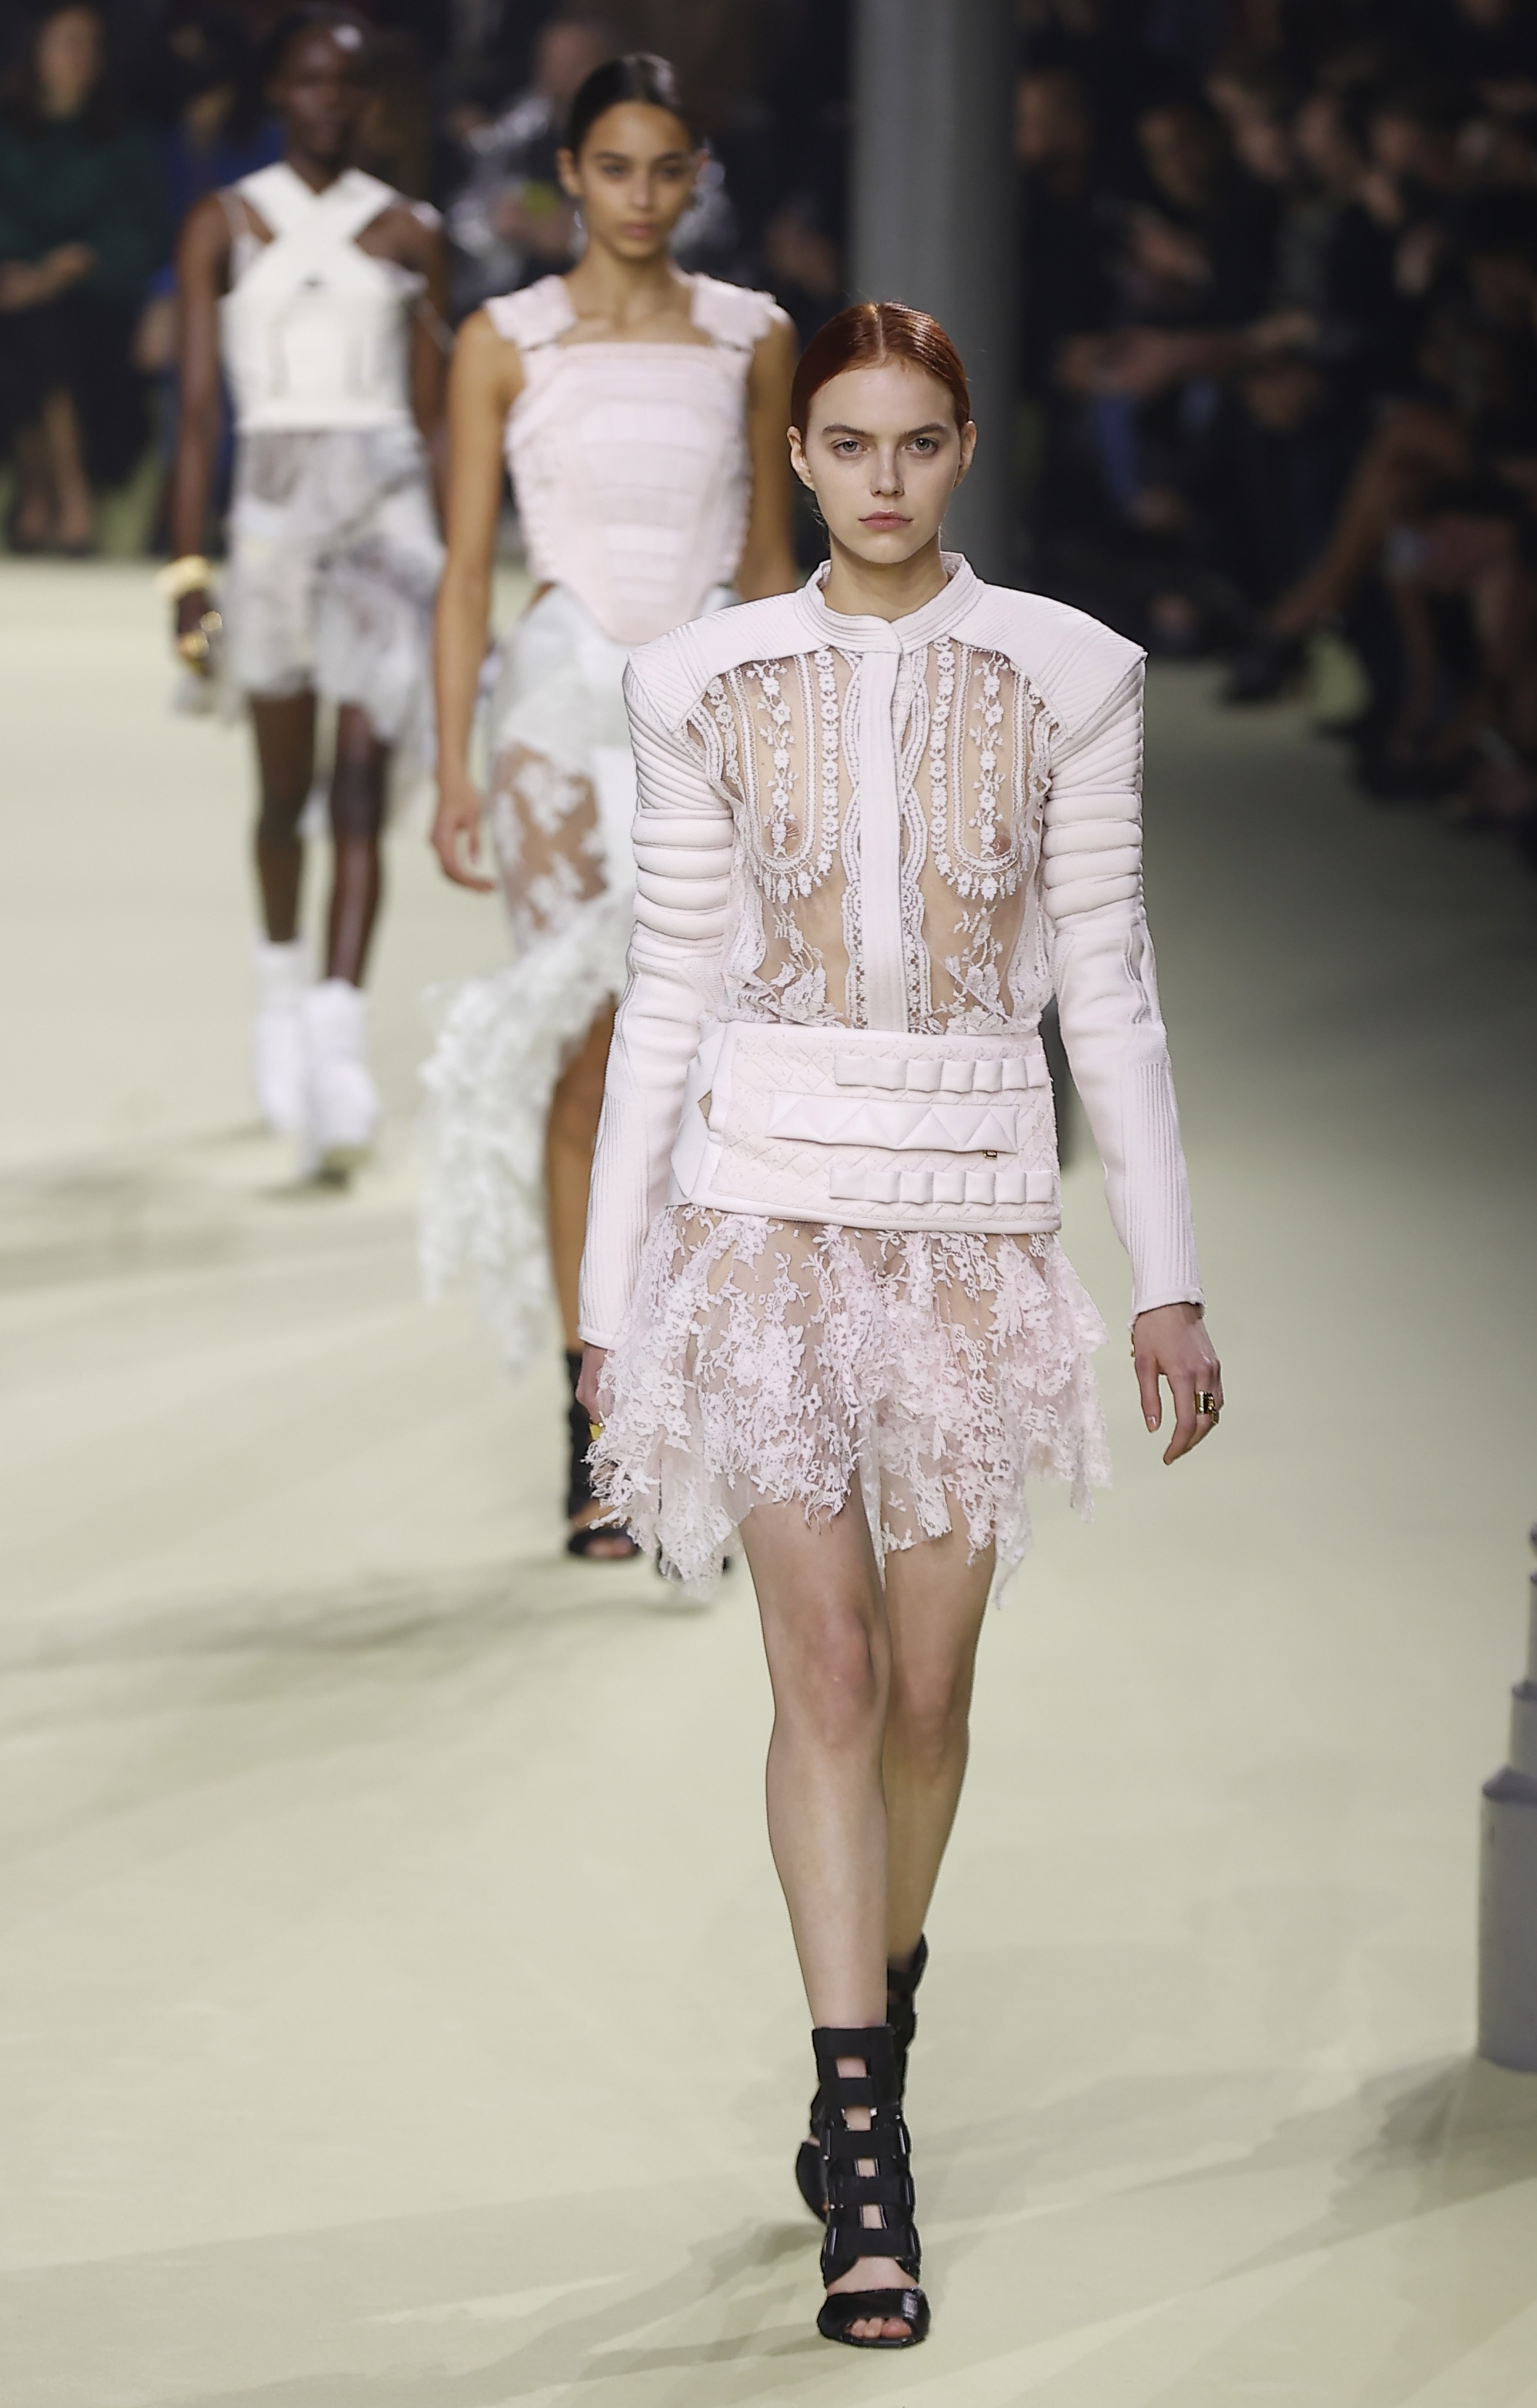 Paris Fashion Week 2022: How Balmain called for peace and truth in